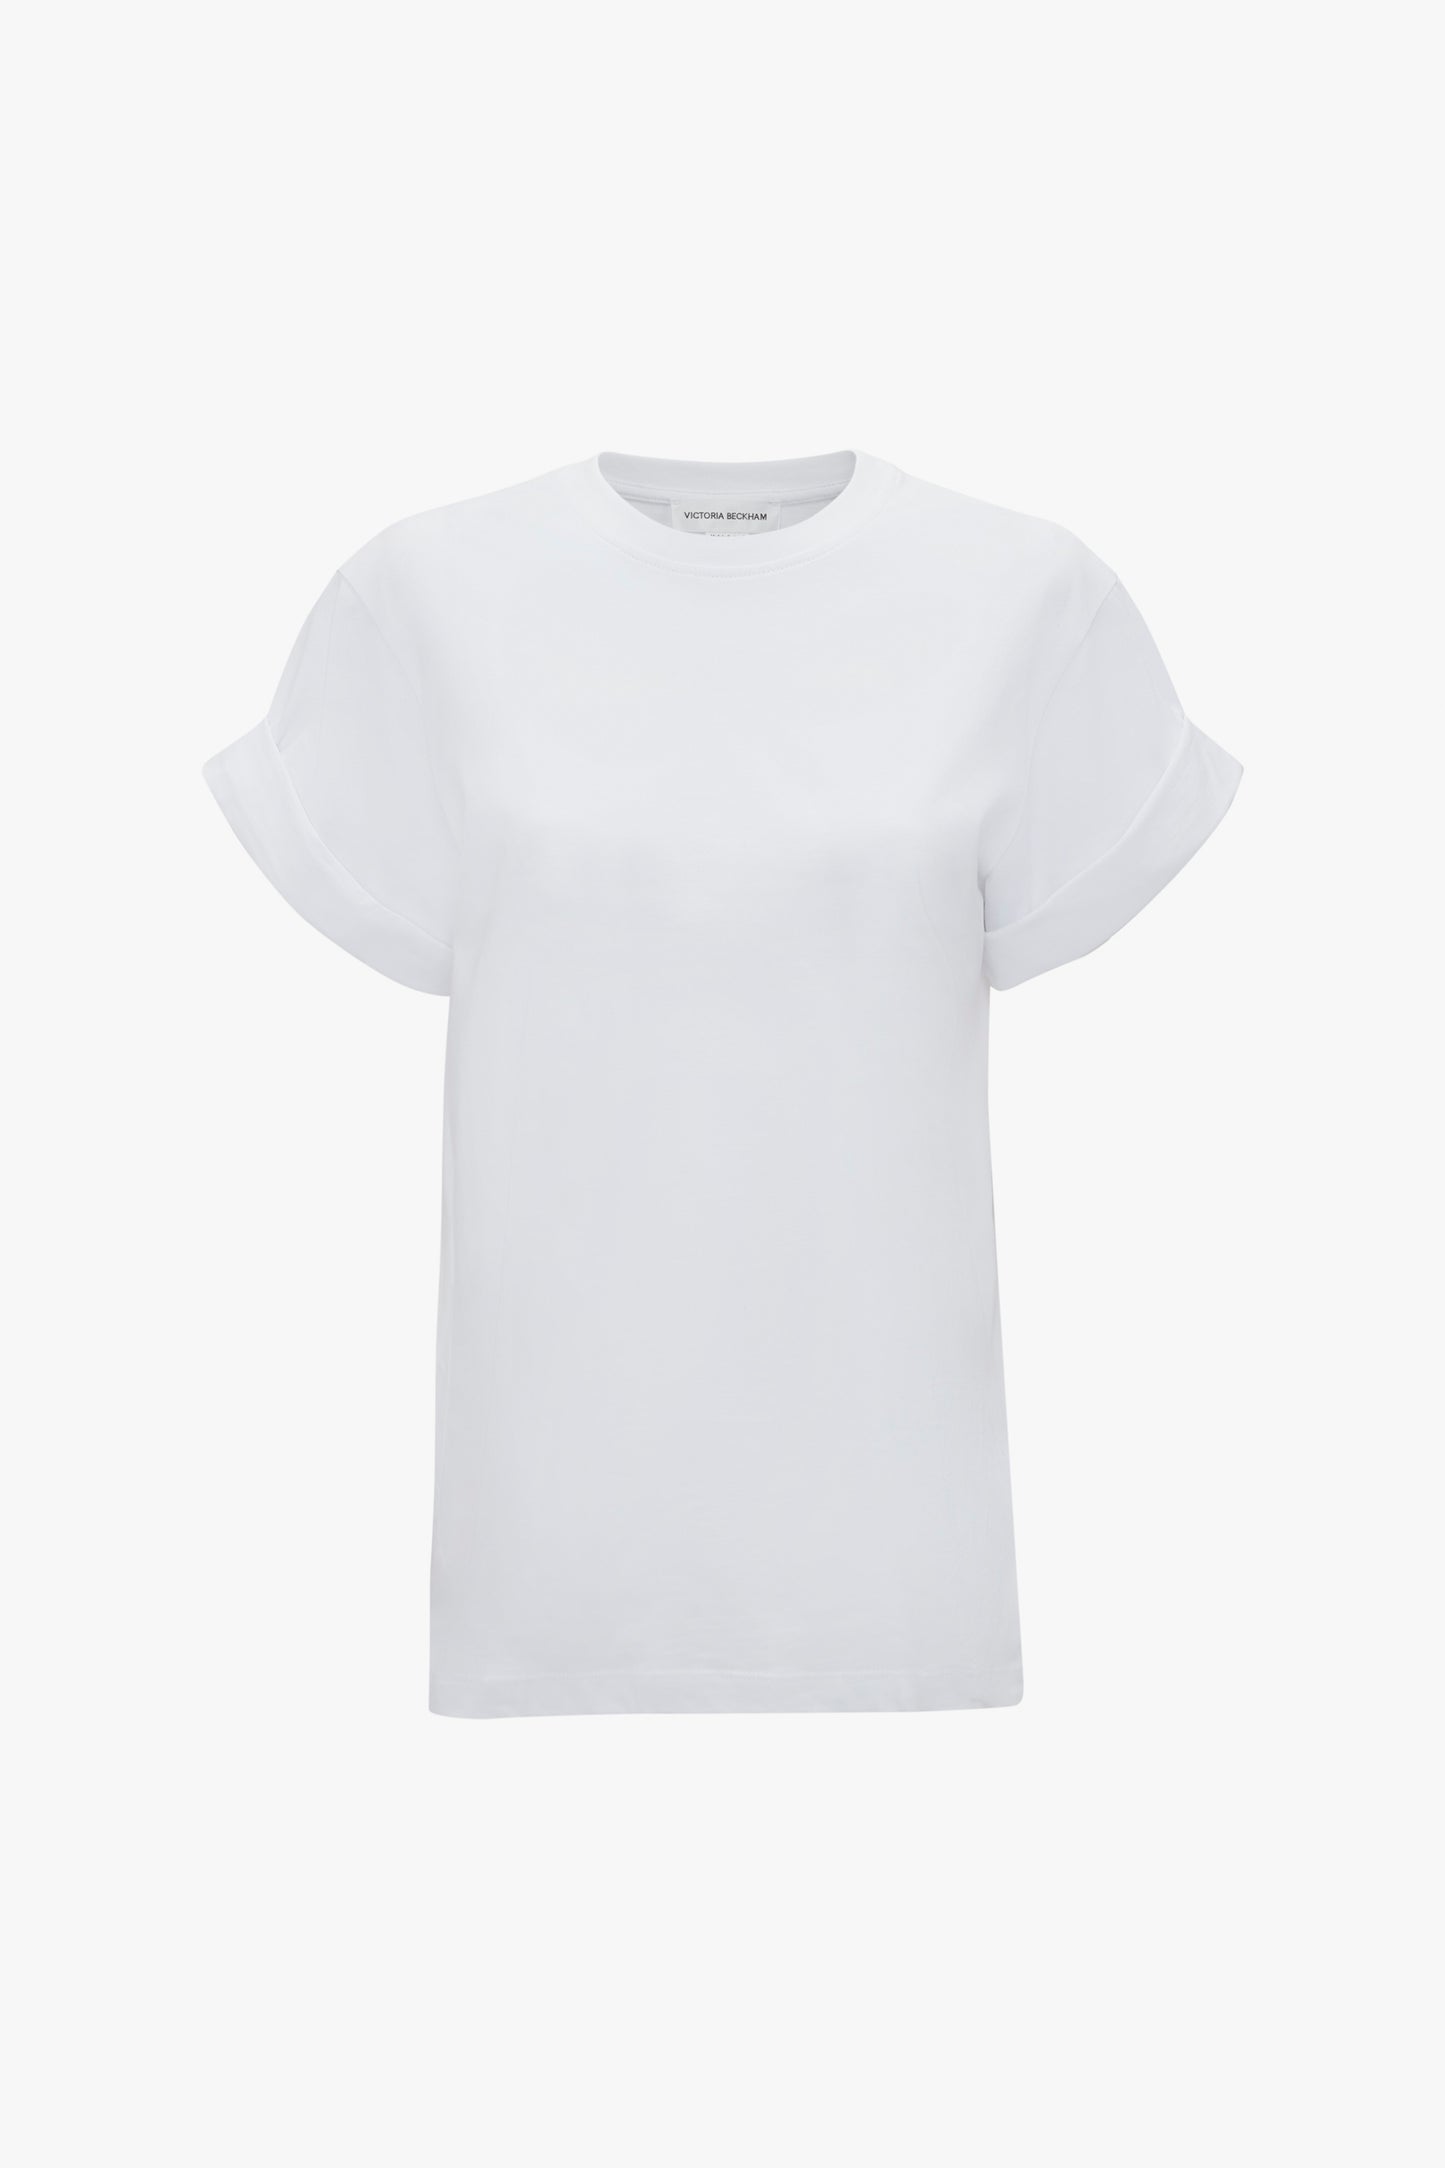 Asymmetric Relaxed Fit T-Shirt in White by Victoria Beckham